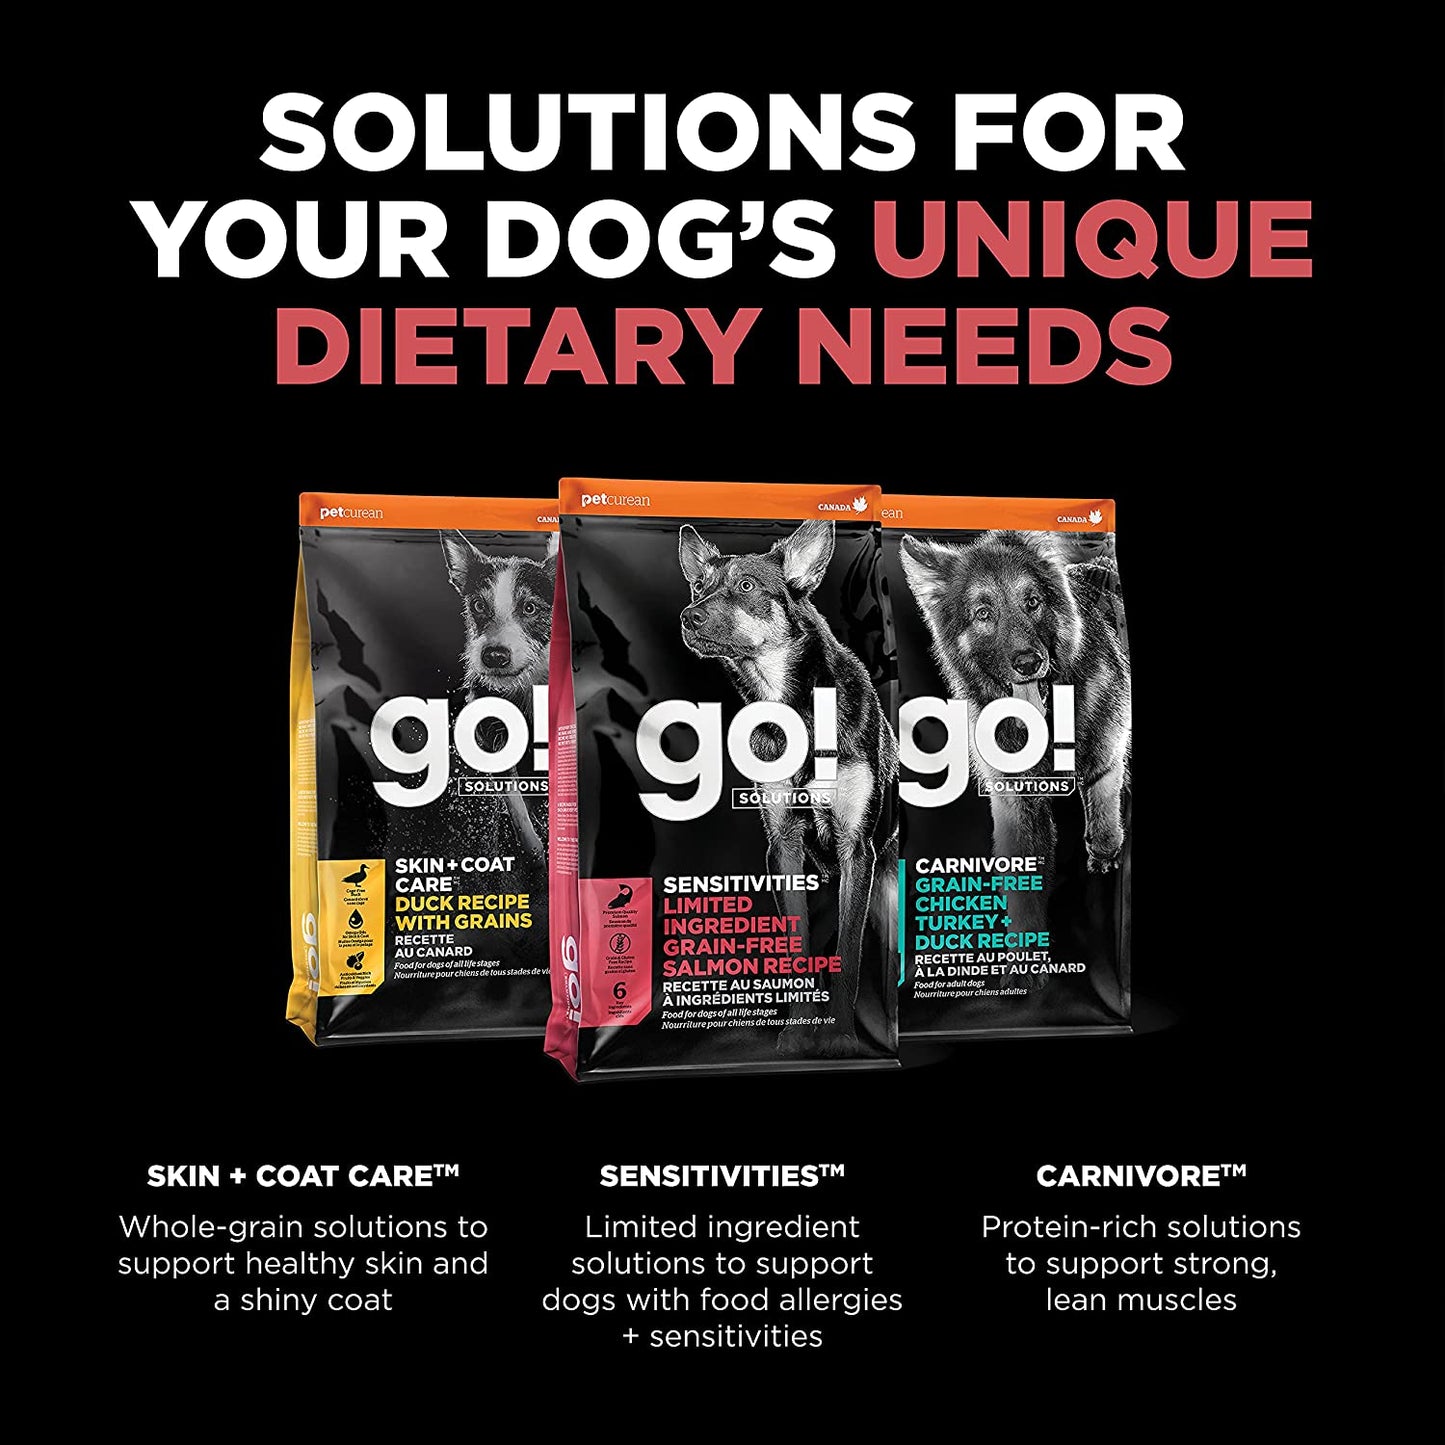 GO! SENSITIVITIES Limited Ingredient Grain Free Salmon recipe for dogs  Dog Food  | PetMax Canada